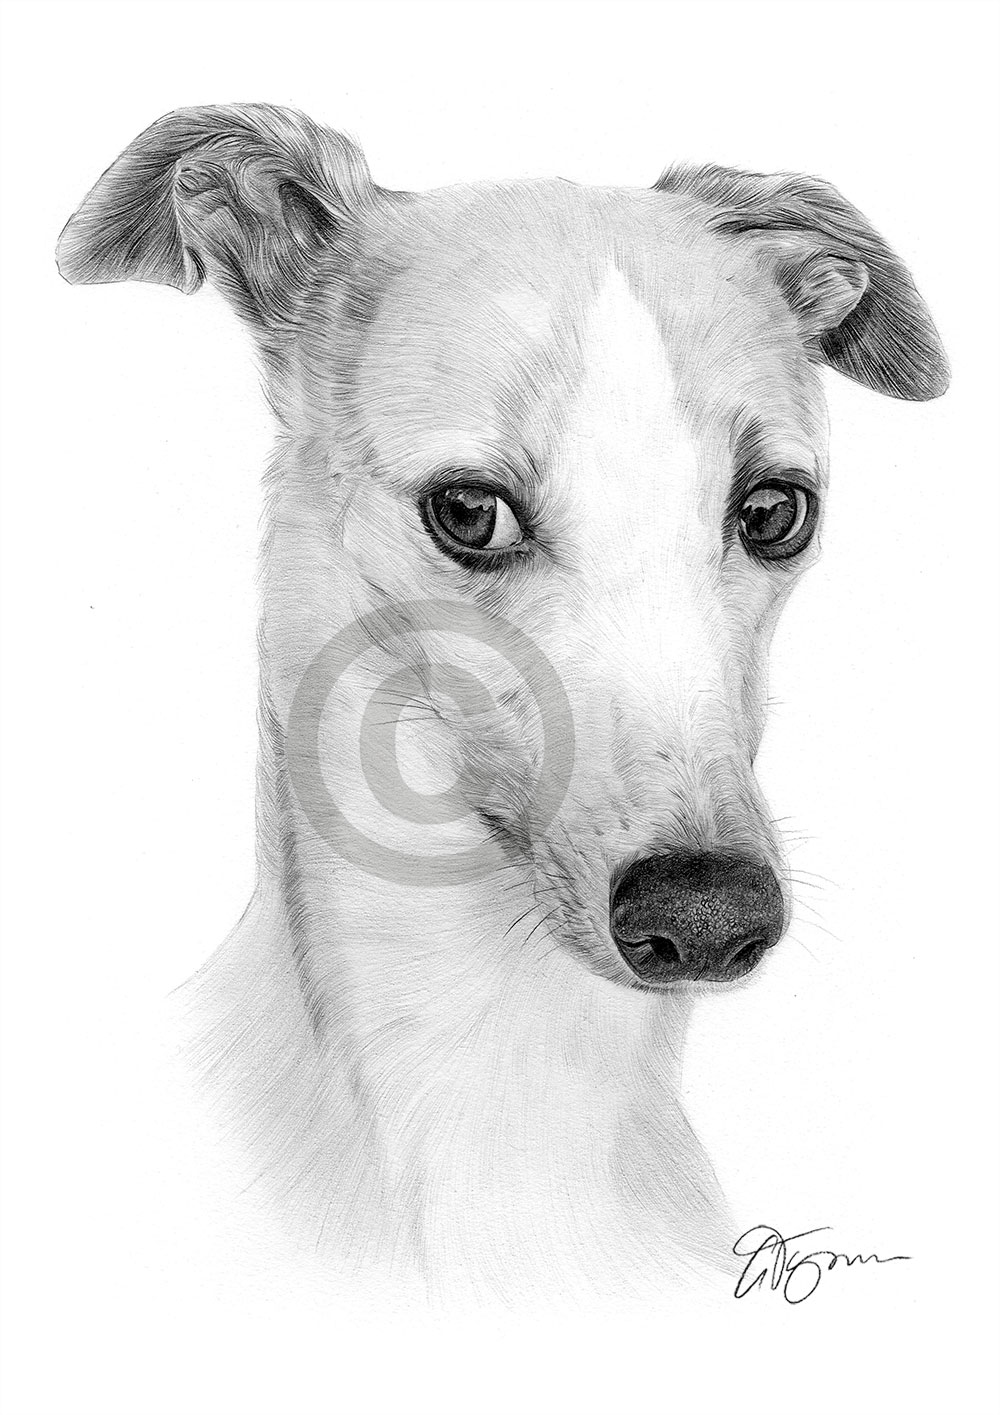 Pencil drawing of a Whippet by artist Gary Tymon